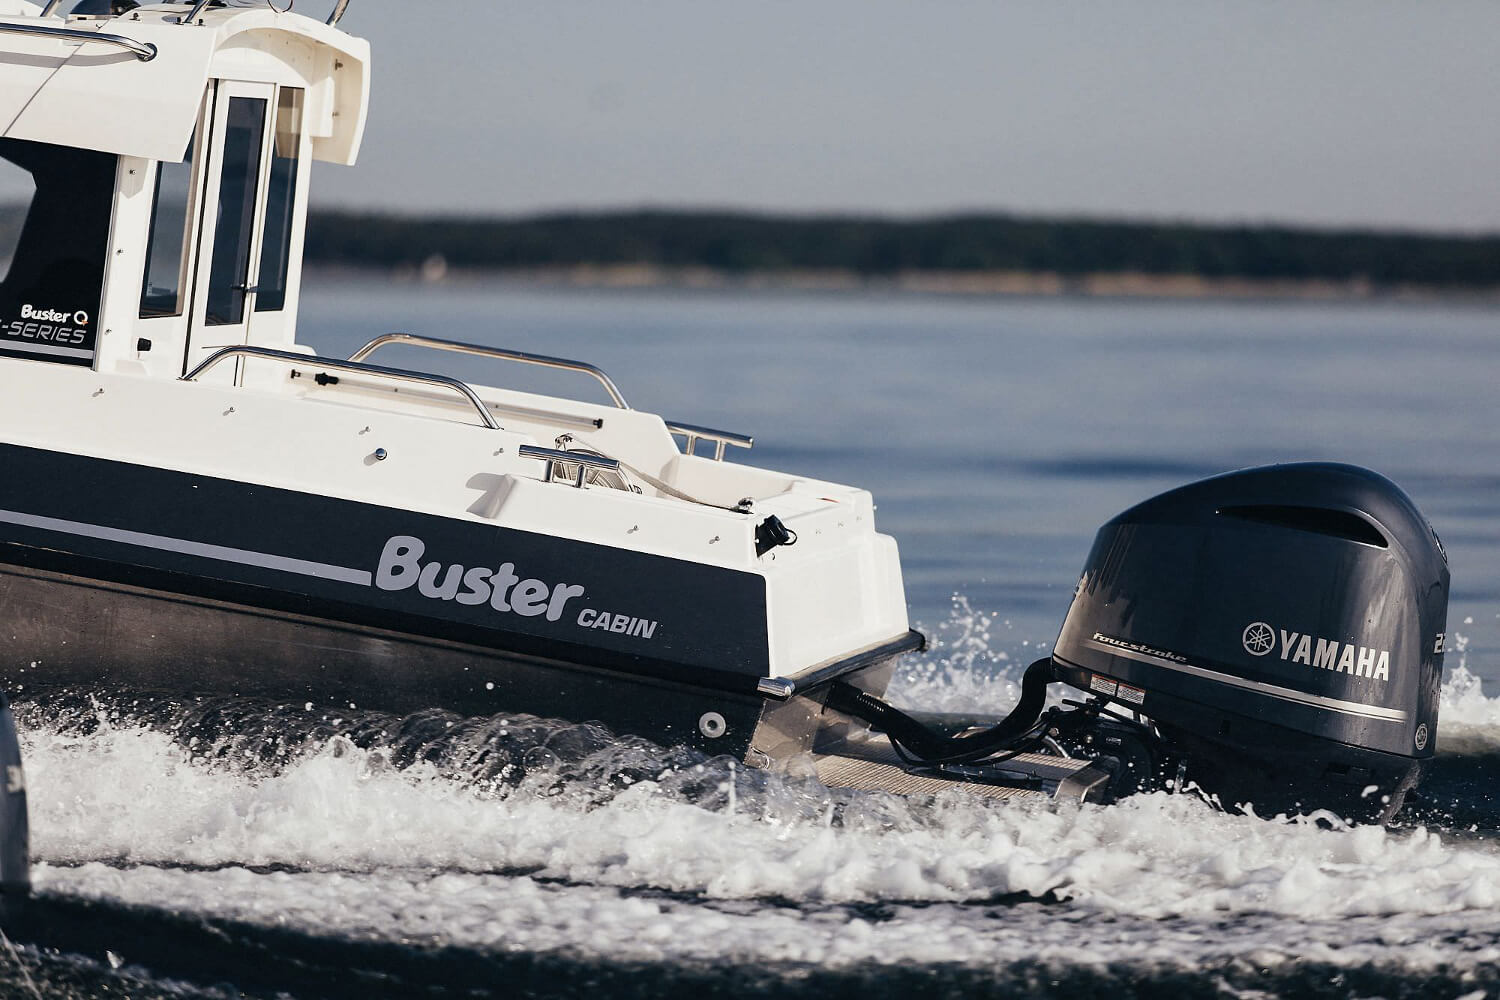 BUSTER CABIN Q, BUSTER CABIN, Алюминиевая лодка Buster, Алюминиевая лодка Buster CABIN Q, Aluminium boat BUSTER CABIN Q, Алюминиевая лодка Buster CABIN, Aluminium boat BUSTER CABIN, Алюминиевый катер BUSTER CABIN Q, Алюминиевый катер BUSTER CABIN, Алюминиевый катер BUSTER